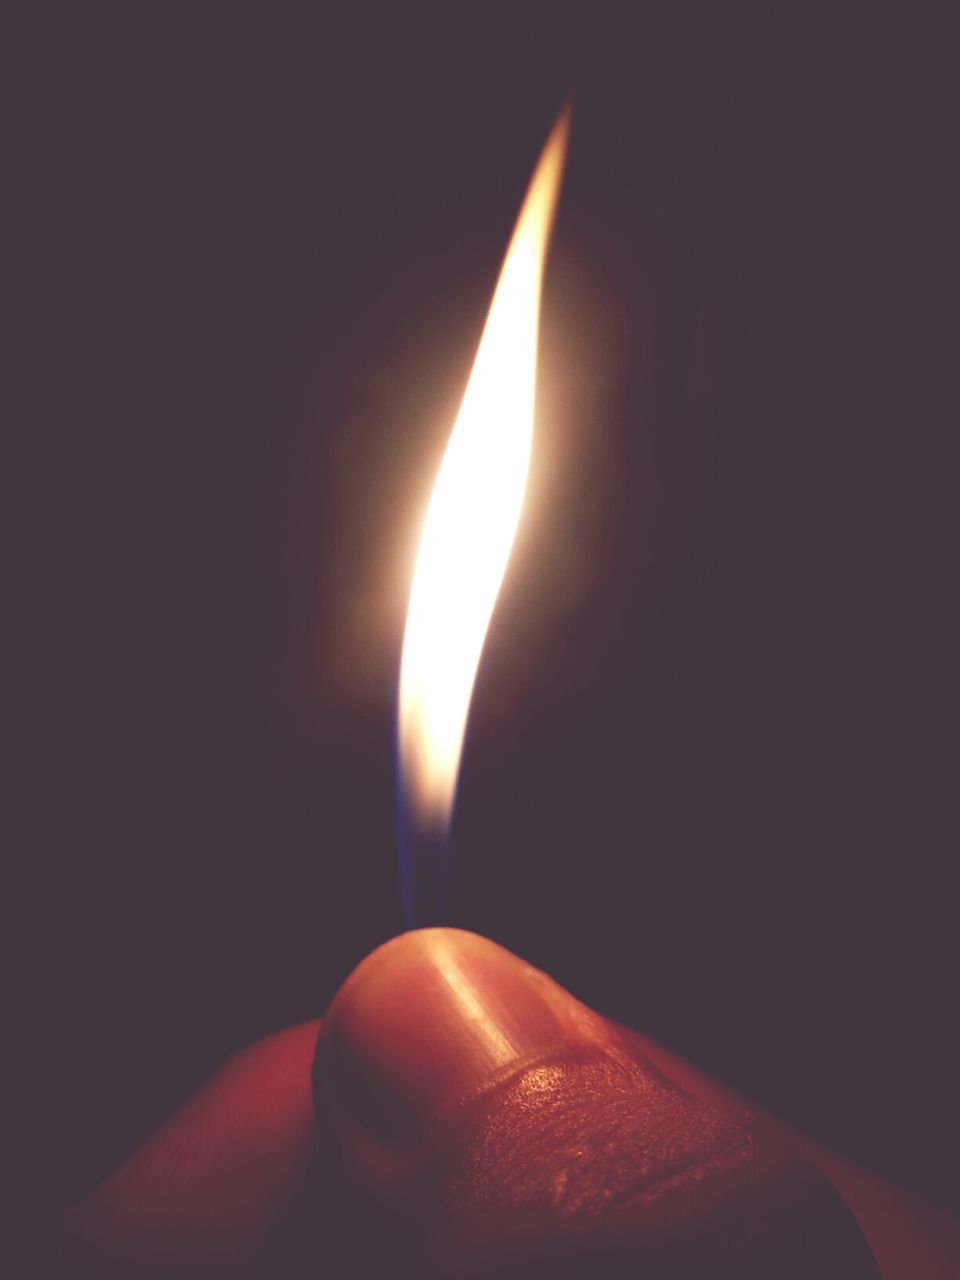 flame, burning, heat - temperature, fire - natural phenomenon, glowing, close-up, black background, studio shot, indoors, orange color, candle, copy space, dark, fire, night, part of, red, heat, lit